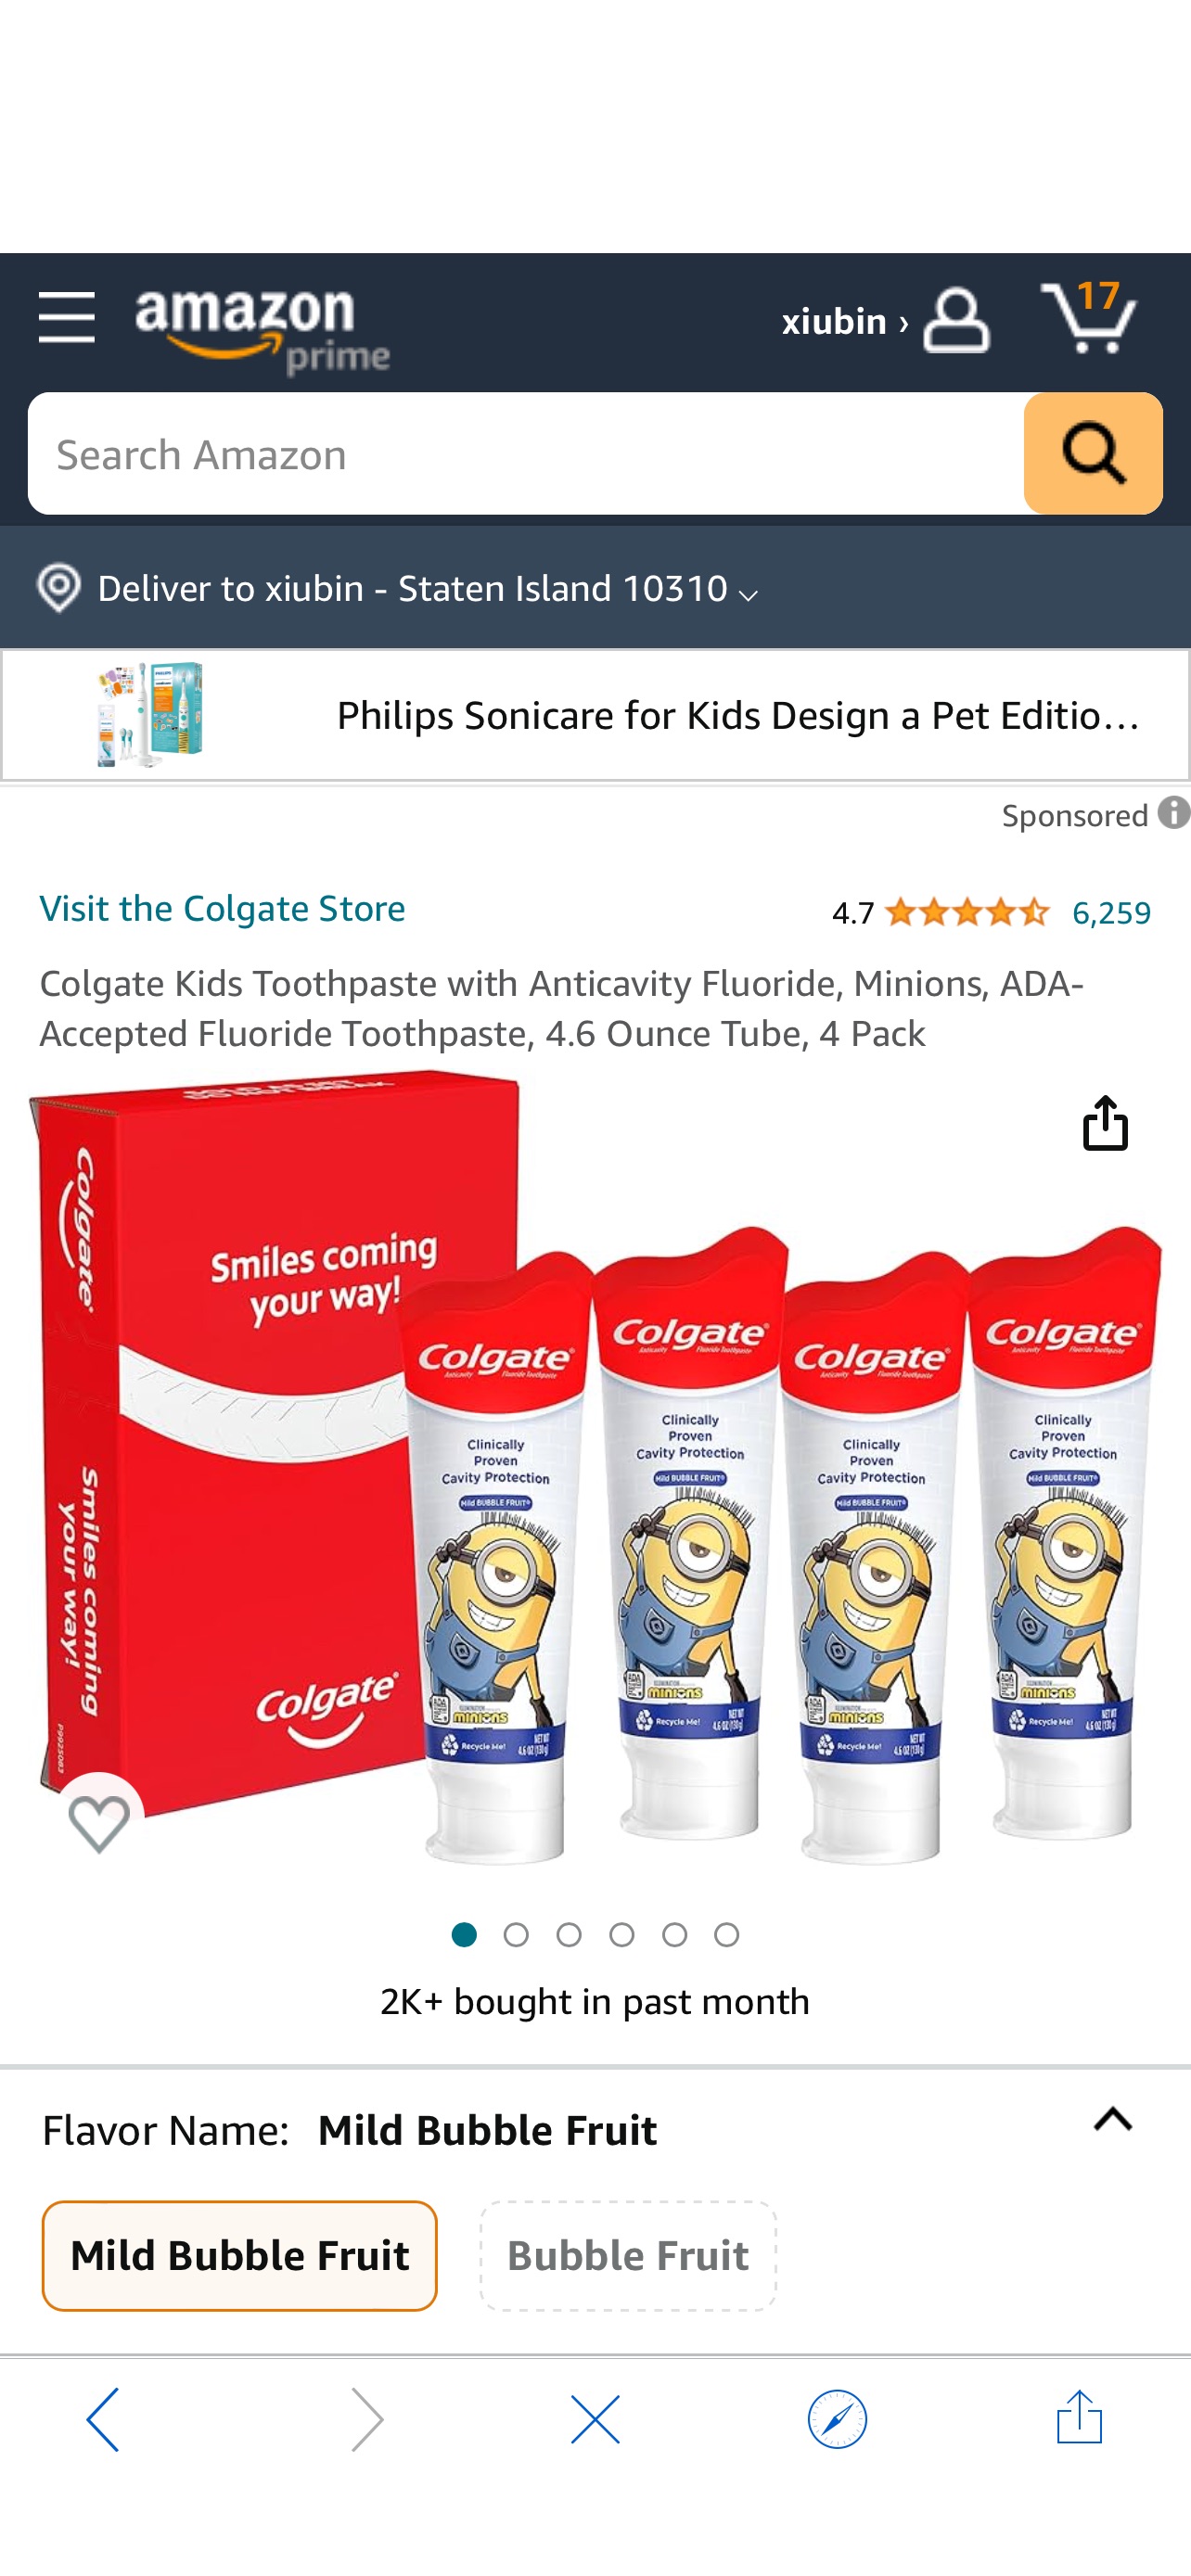 Amazon.com: Colgate Kids Toothpaste with Anticavity Fluoride, Minions, ADA-Accepted Fluoride Toothpaste, 4.6 Ounce Tube, 4 Pack : Health & Household